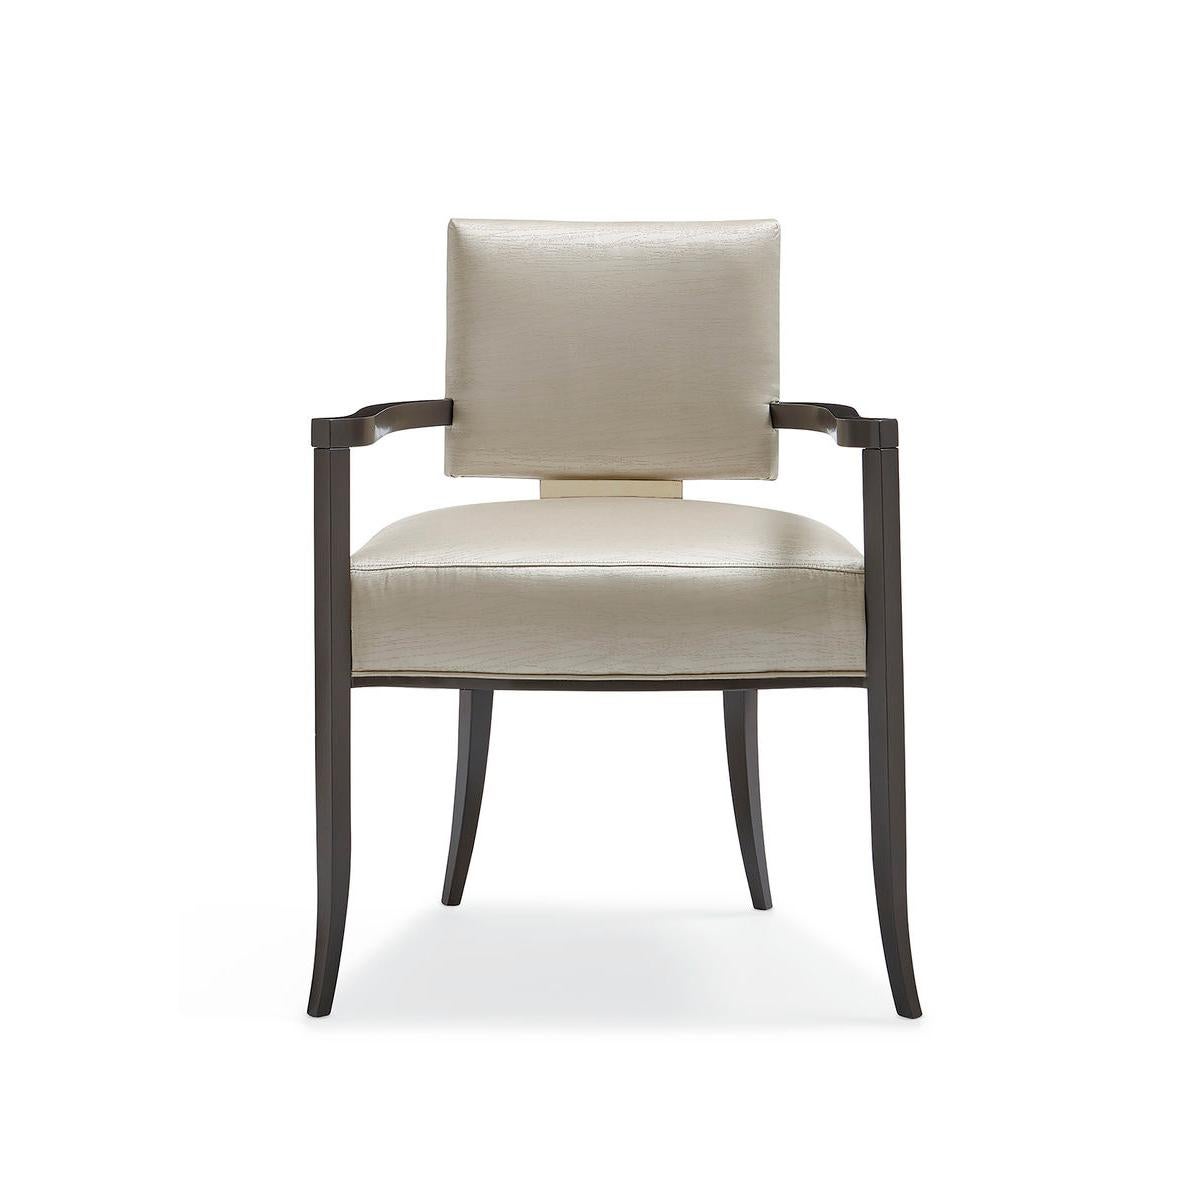 Modern Dining Armchair, for a fresh interpretation on a low, modern klismos chair, this silhouette takes on dramatic style when you view the wide, Whisper of Gold panel that shines off its back. A neutral sateen fabric with a subtle moire pattern